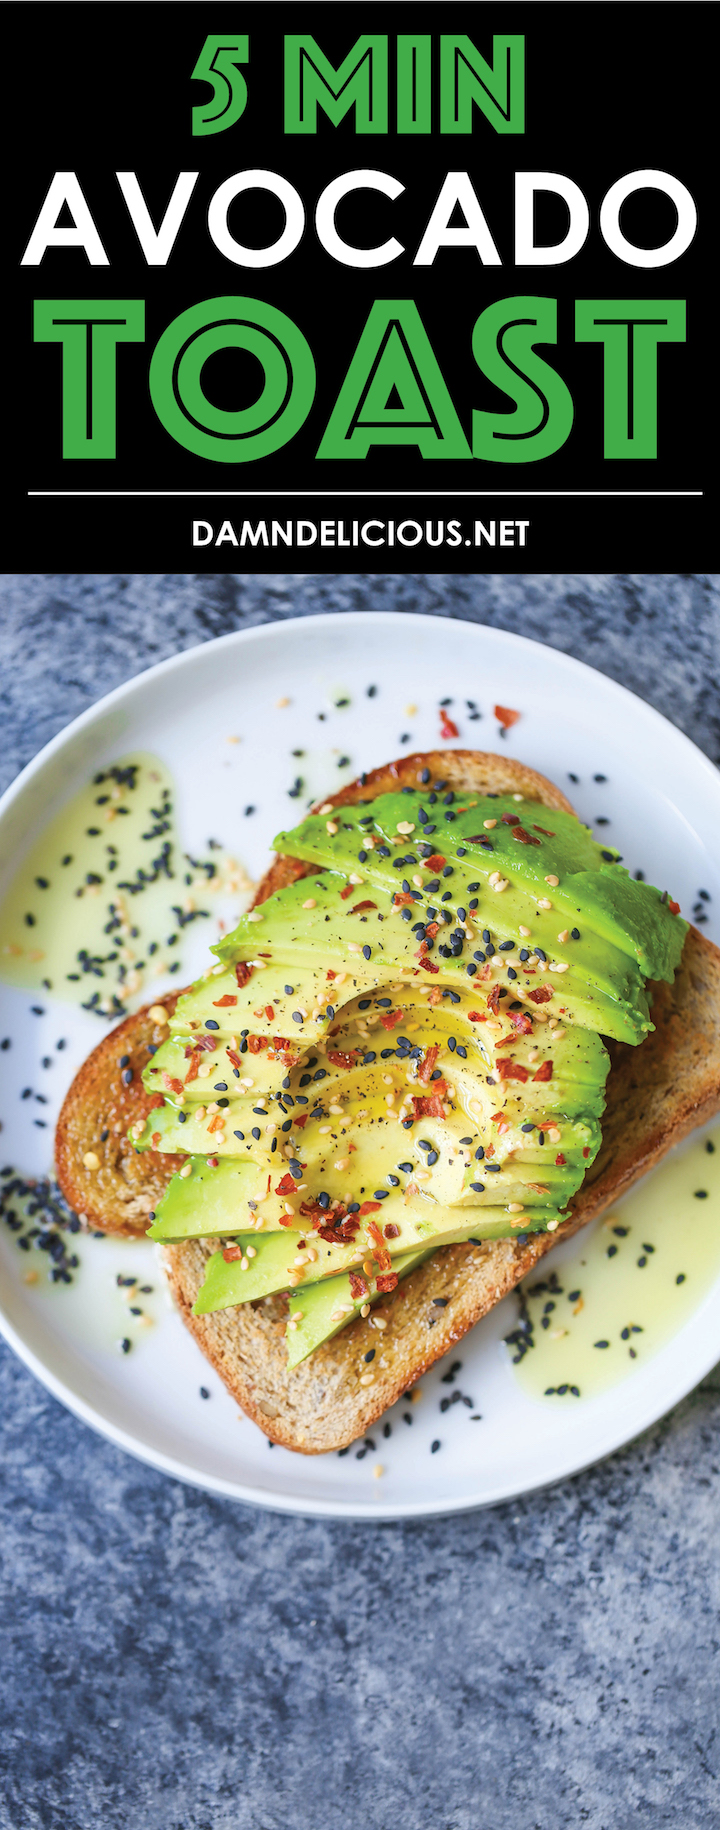 5 Minute Avocado Toast - Simply the best breakfast of all time. Made in 5 min from start to finish, or really 2 min 30 sec. Toast, slice, drizzle. Boom.